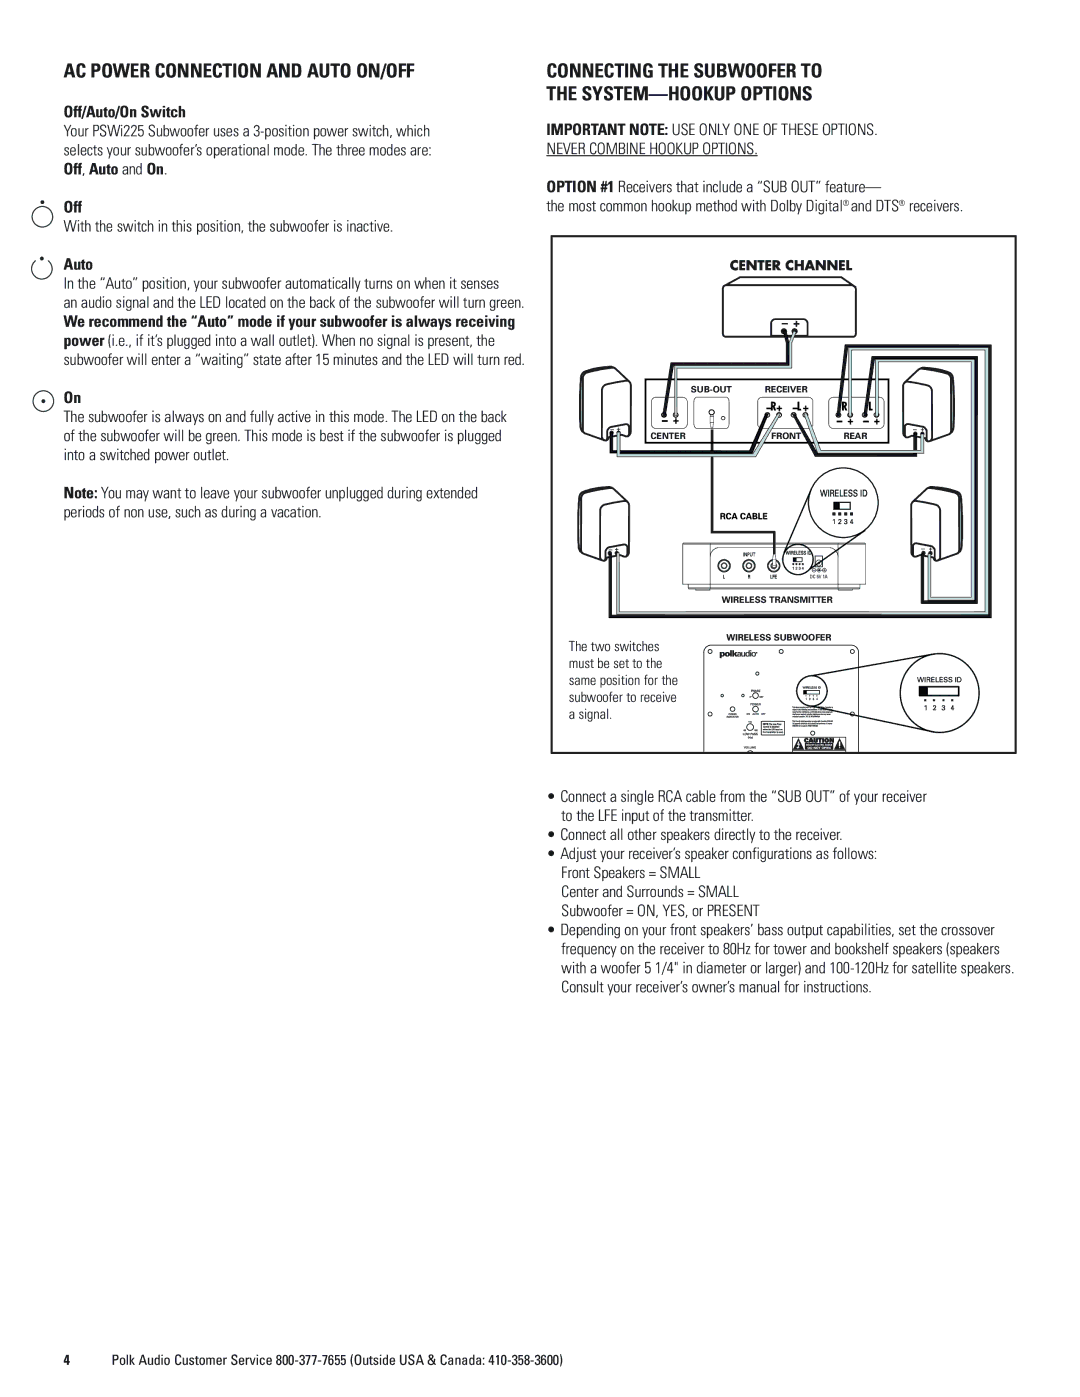 Polk Audio PSWi225 owner manual AC Power Connection and Auto ON/OFF, Connecting the Subwoofer to SYSTEM-HOOKUP Options, Off 